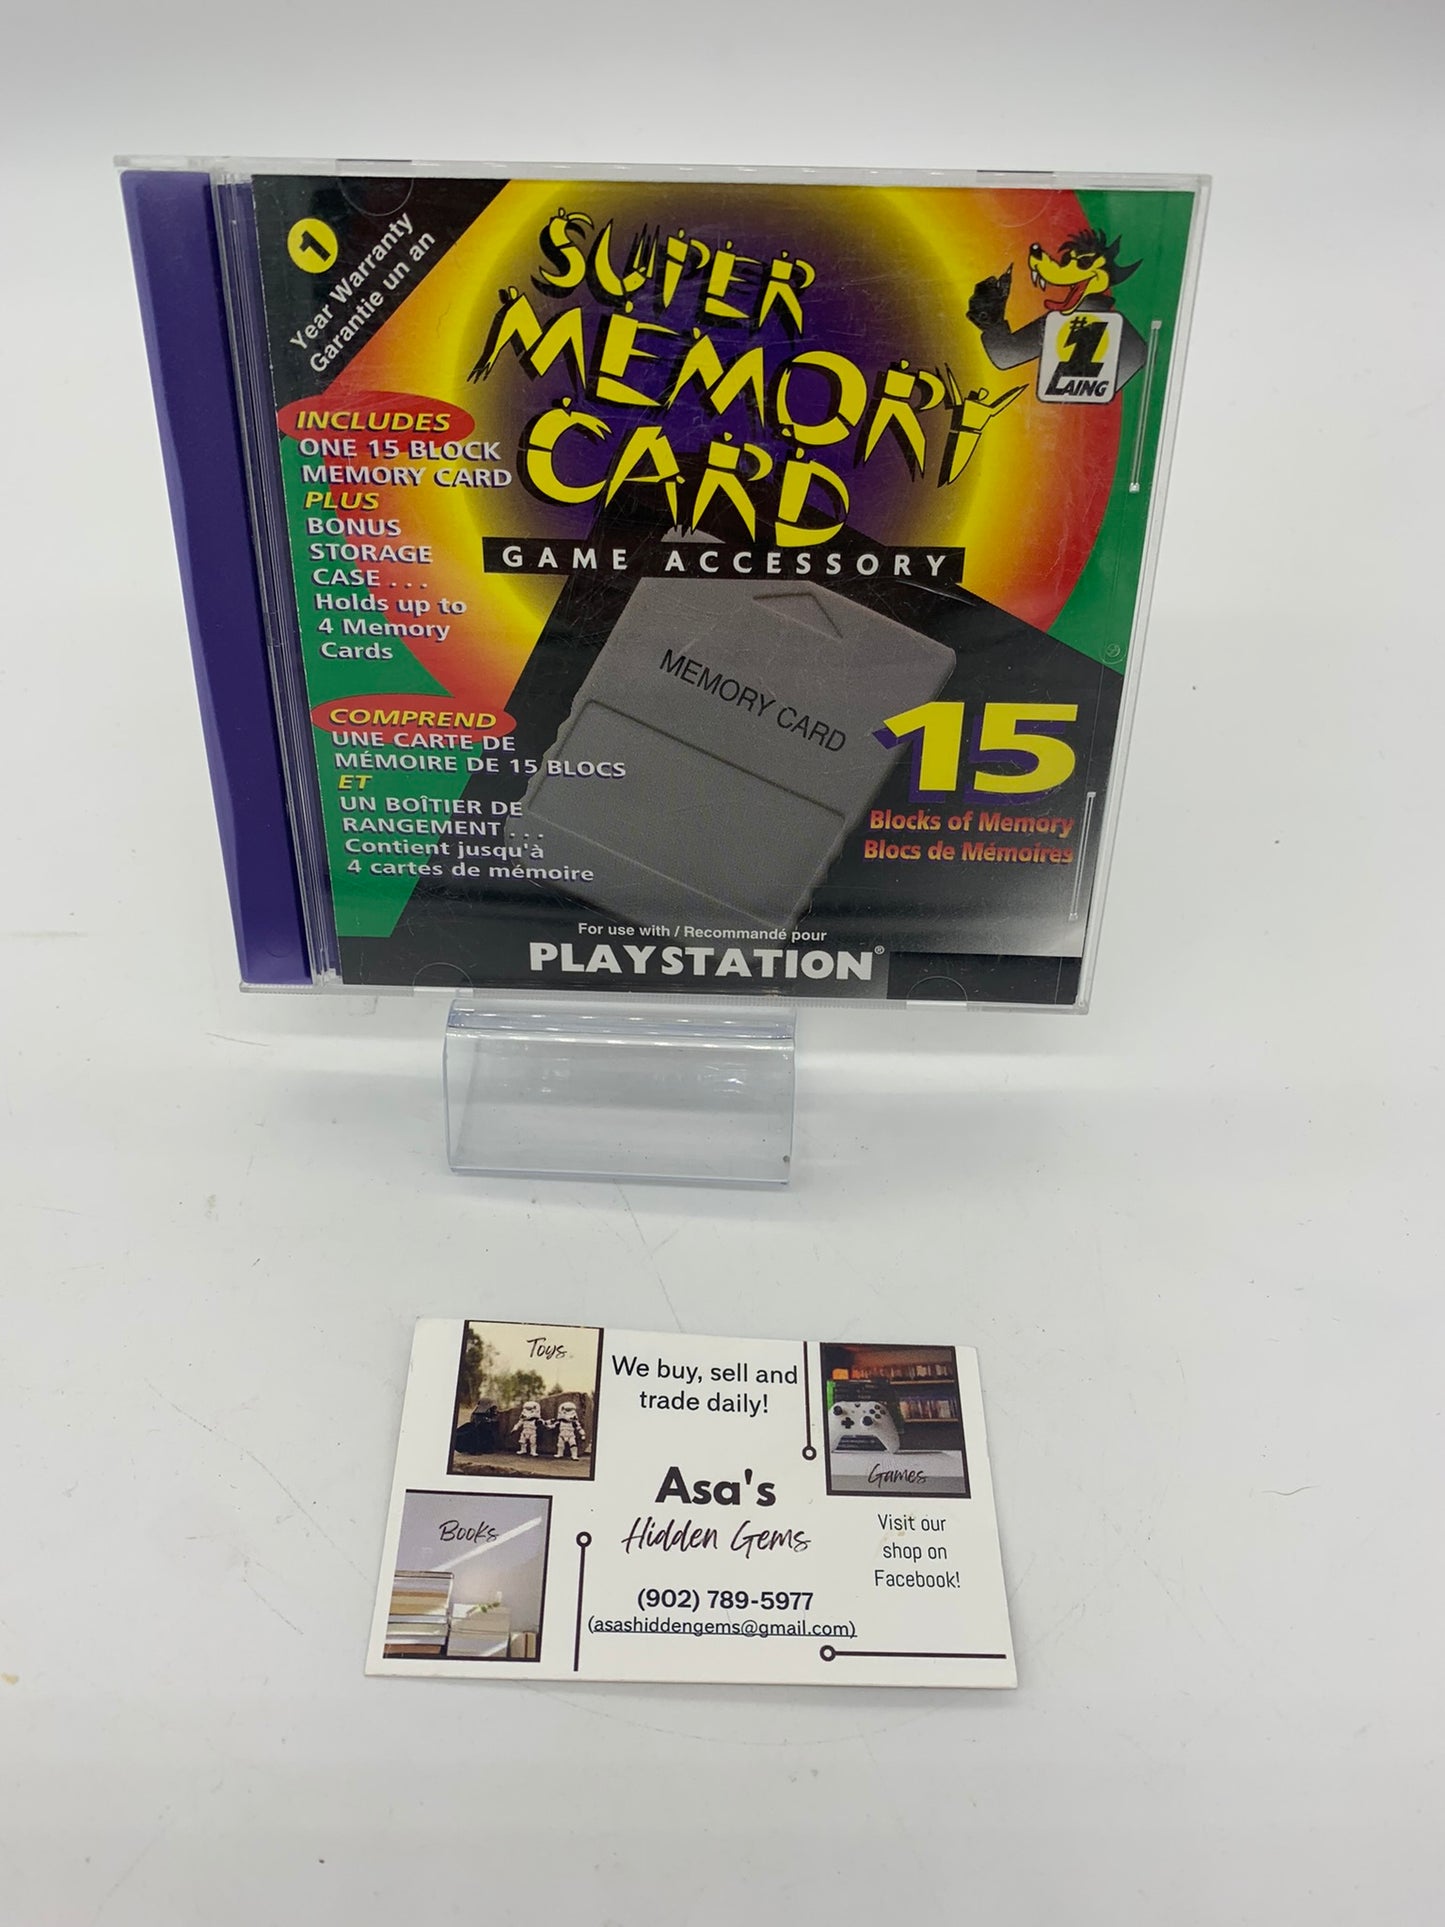 Super Memory Card Game Accessory and Case PS1